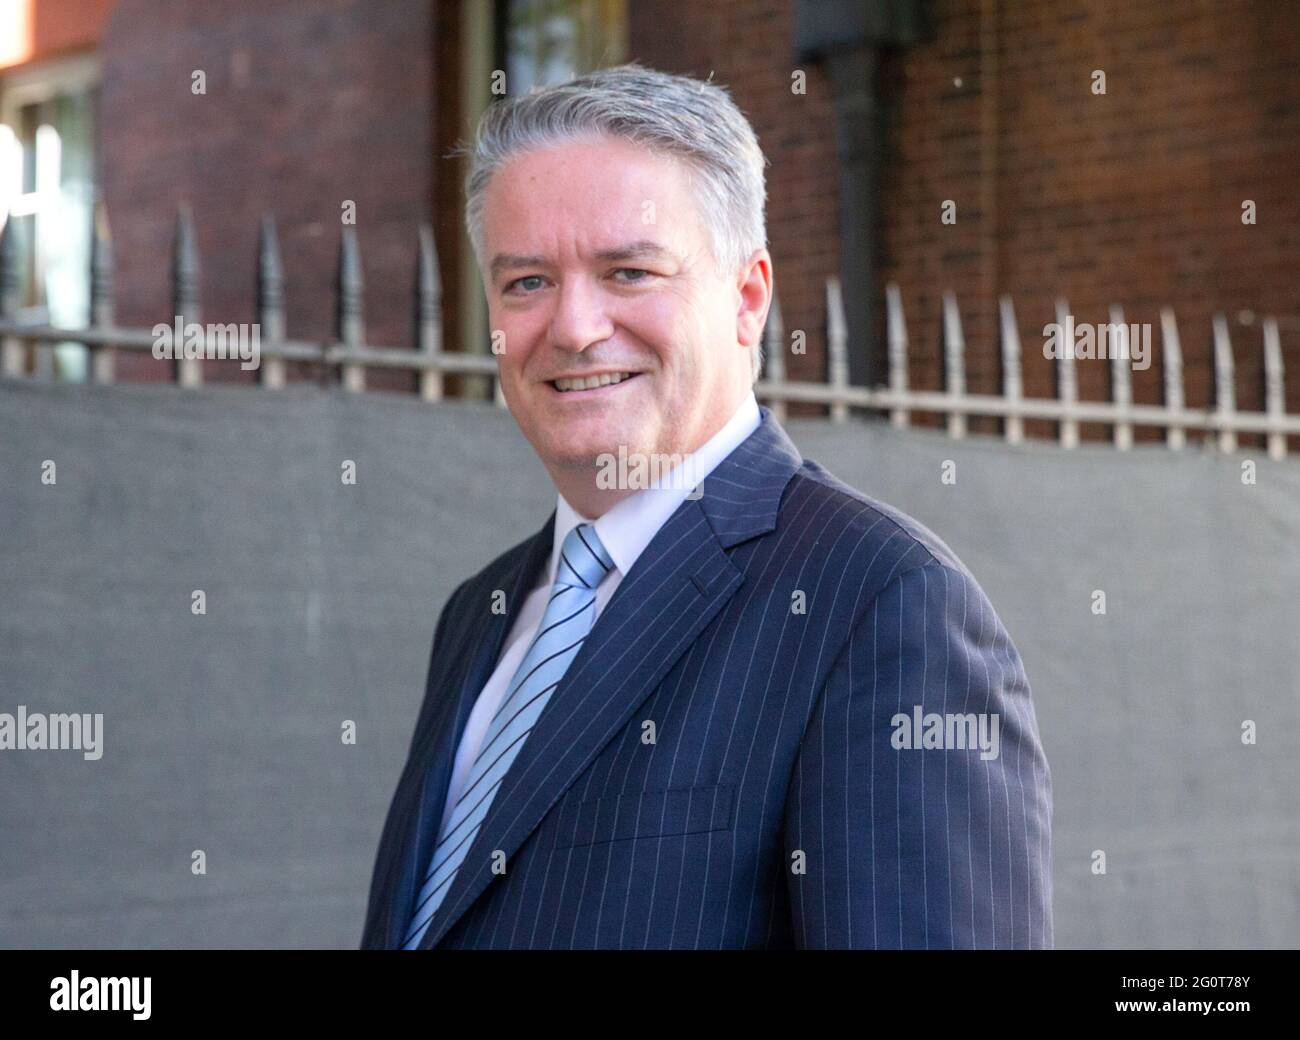 London, UK. 3rd June, 2021. Mathias Cormann, Secretary-General of the Organisation for Economic Co-Operation and Development, at Downing Street for a meeting ahead of the G7 Finance Ministers meeting which starts in London on June 4th. It is his second full day in the job Credit: Mark Thomas/Alamy Live News Stock Photo